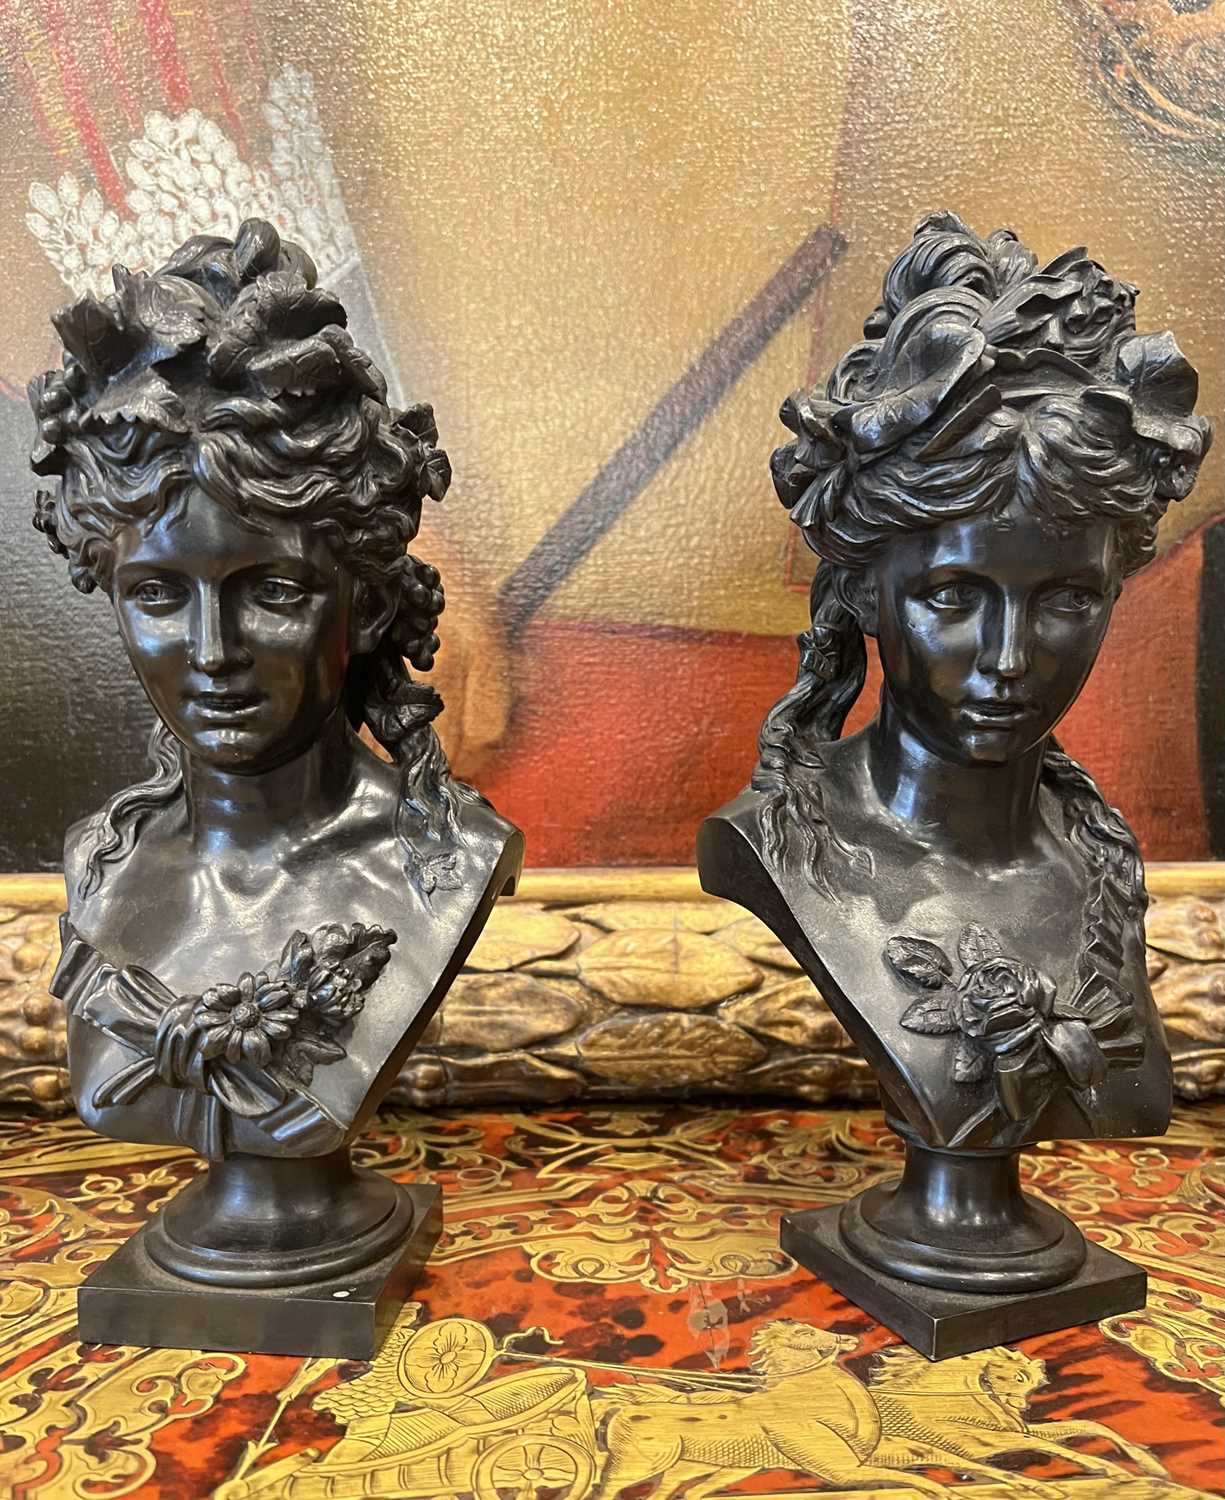 JEAN-LOUIS GRÉGOIRE, (FRENCH, 1840-1890): A PAIR OF BRONZE BUSTS OF MAIDENS